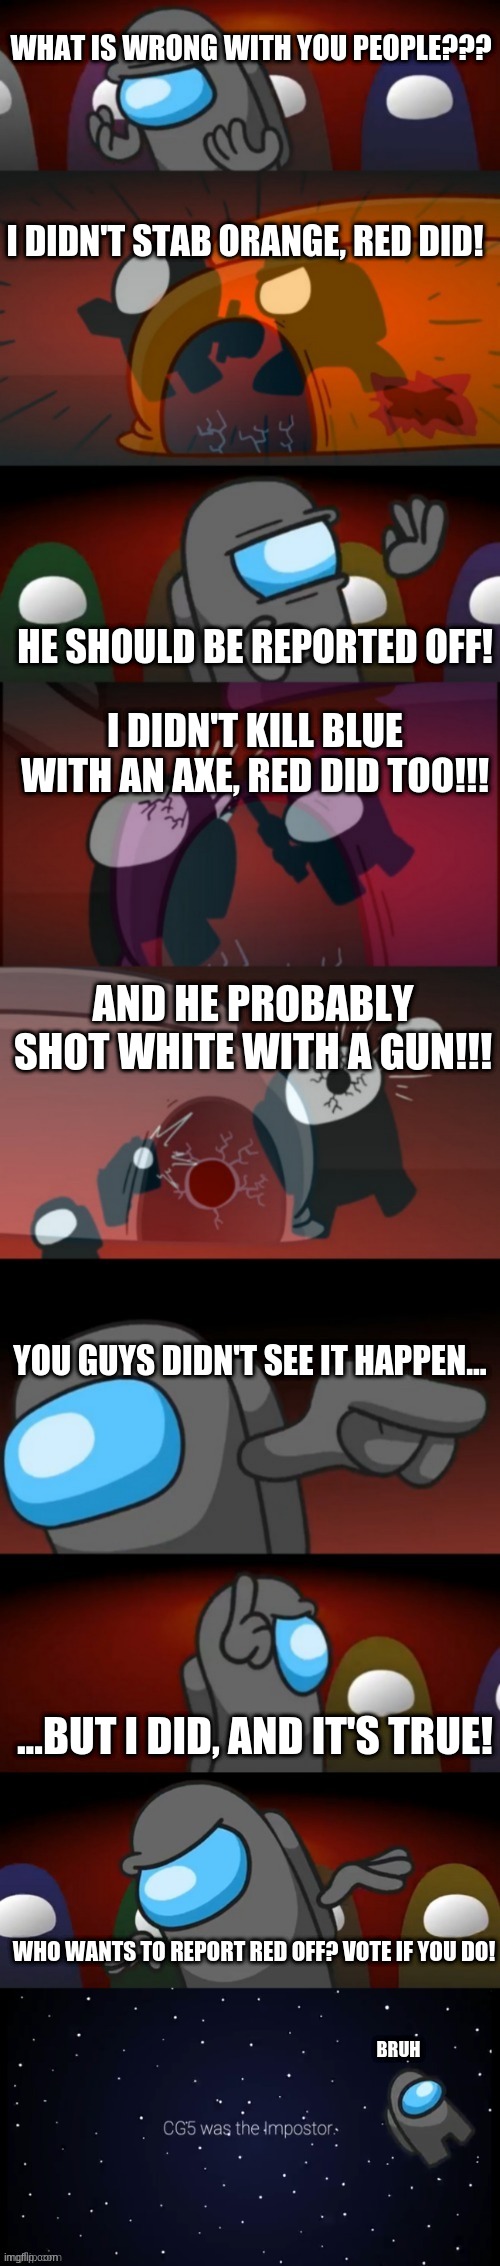 Red is Always Sus (Among Us) | WHAT IS WRONG WITH YOU PEOPLE??? I DIDN'T STAB ORANGE, RED DID! HE SHOULD BE REPORTED OFF! I DIDN'T KILL BLUE WITH AN AXE, RED DID TOO!!! AND HE PROBABLY SHOT WHITE WITH A GUN!!! YOU GUYS DIDN'T SEE IT HAPPEN... ...BUT I DID, AND IT'S TRUE! WHO WANTS TO REPORT RED OFF? VOTE IF YOU DO! BRUH | image tagged in among us | made w/ Imgflip meme maker